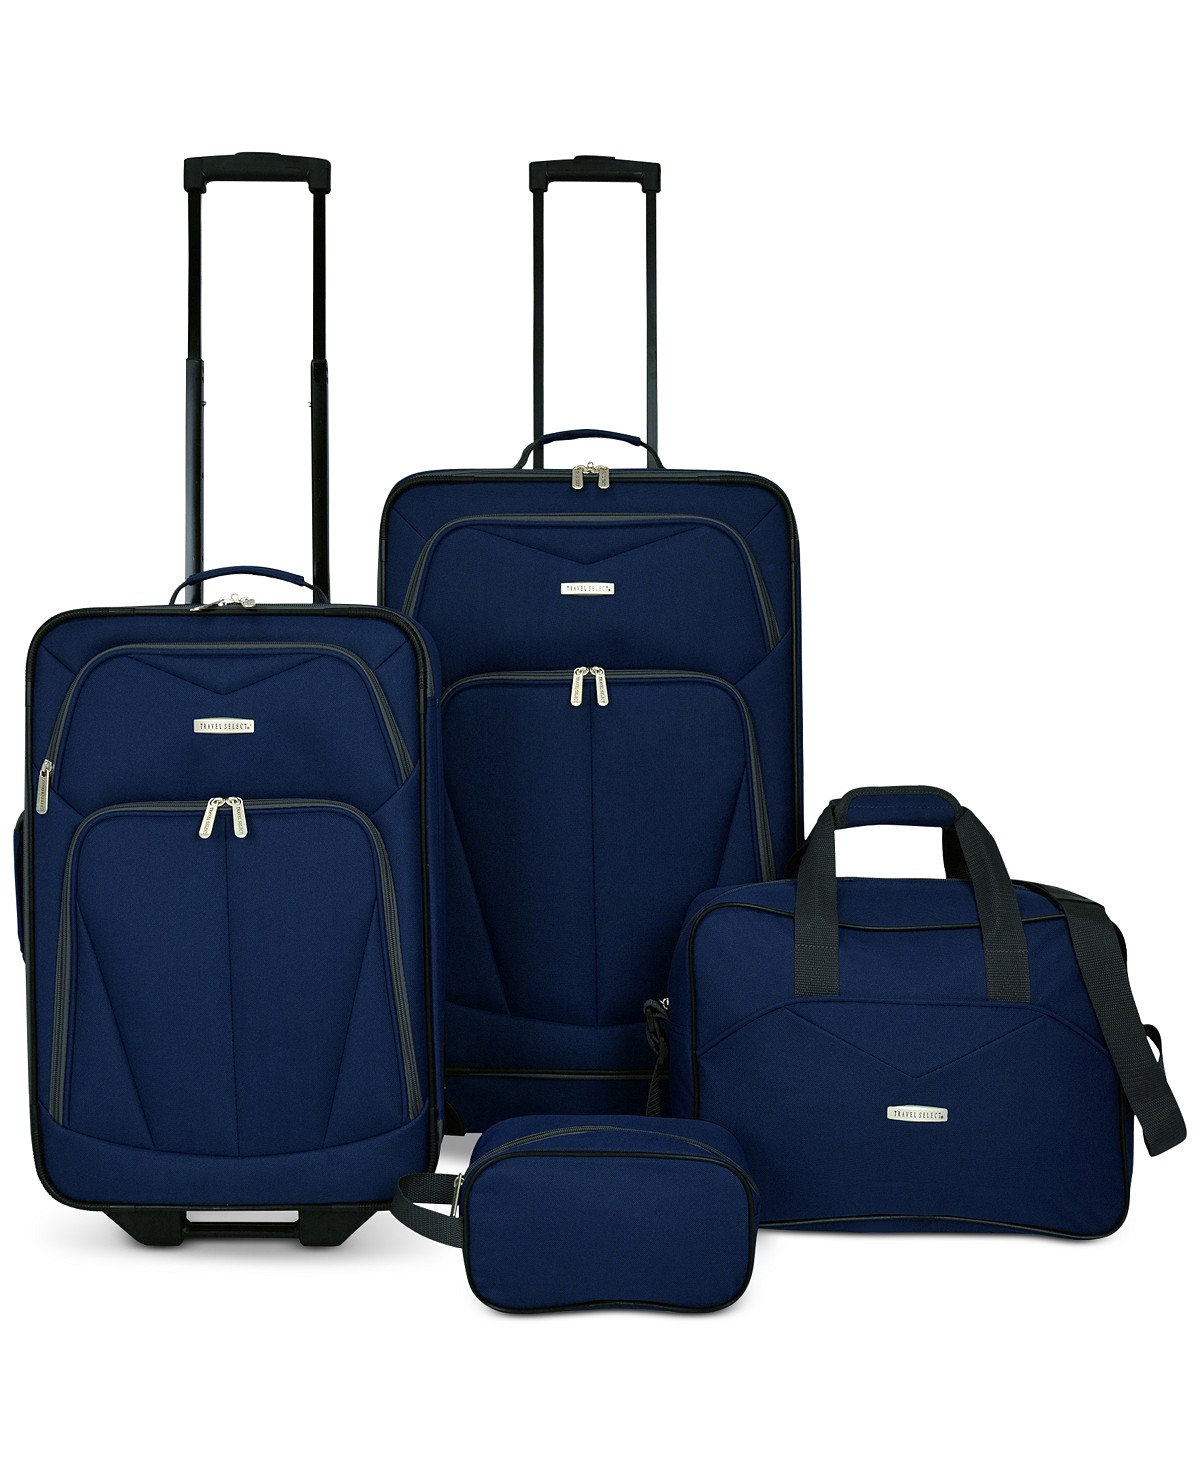 Travel Select Kingsway 4-piece luggage set for $50